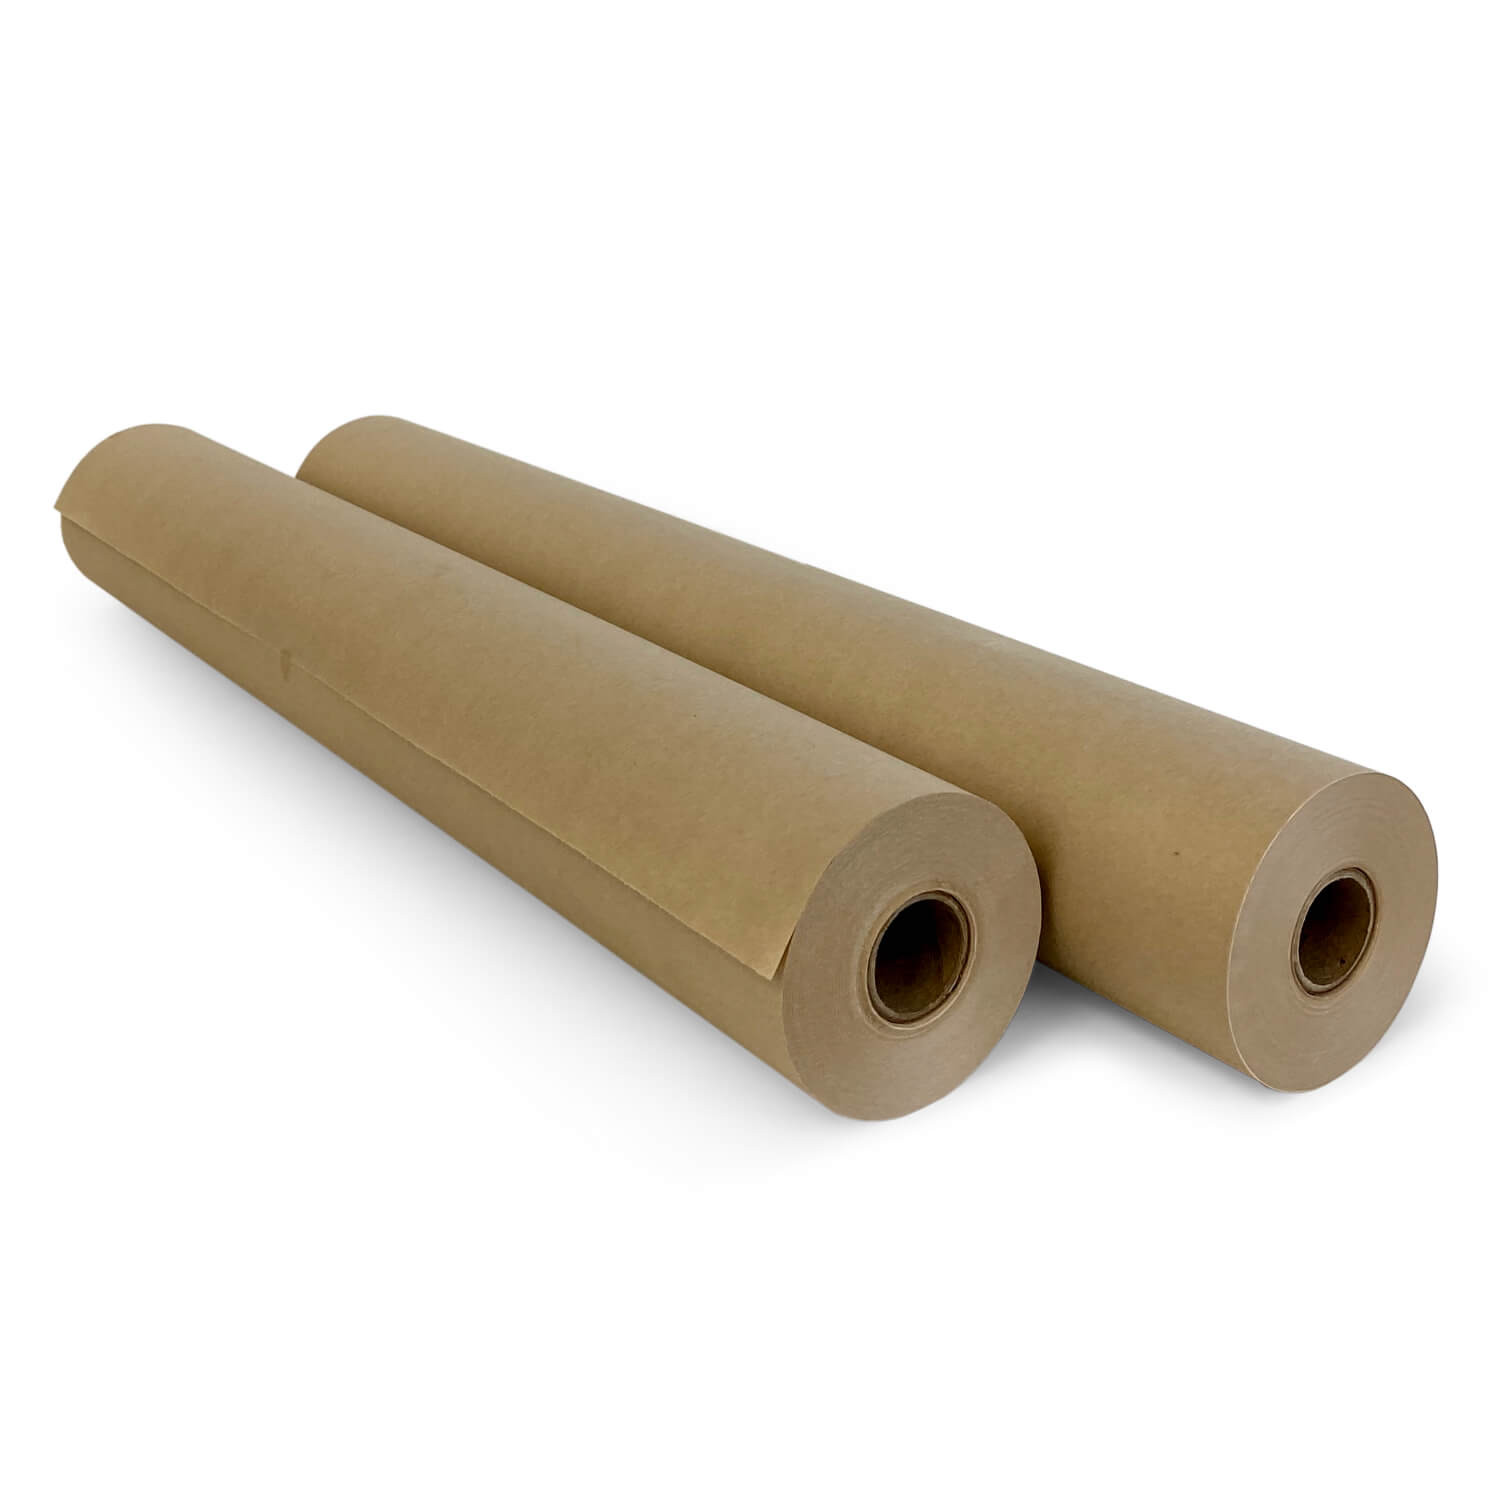 PD-RD36 Kraft Paper Roll Dispenser & Cutter for Rolls up to 36 Wide and 9  in Diameter buy in stock in U.S. in IDL Packaging